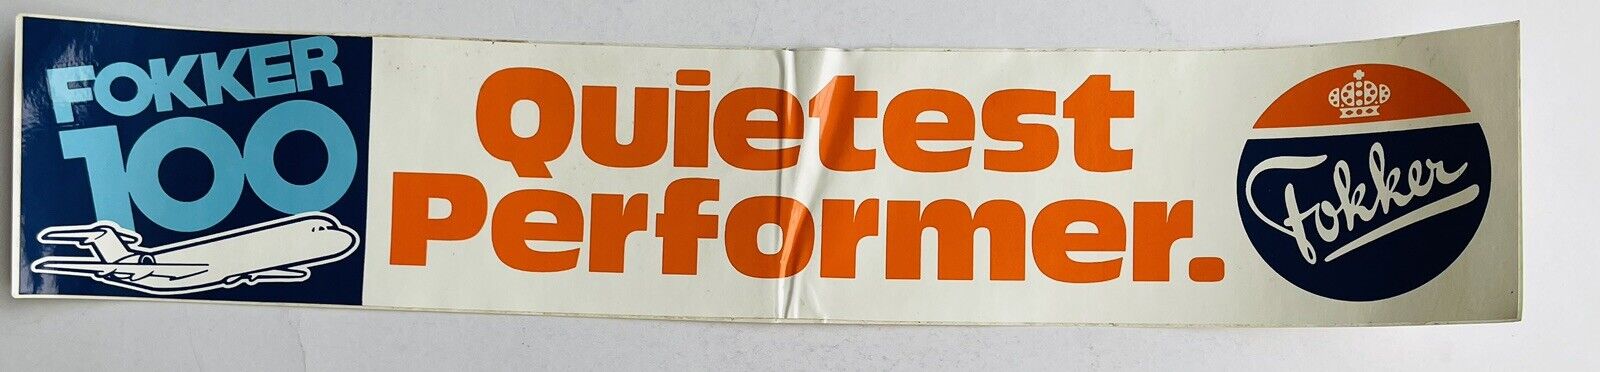 Fokker Aircraft 100 Airlines Large Sticker - Quietest Performer